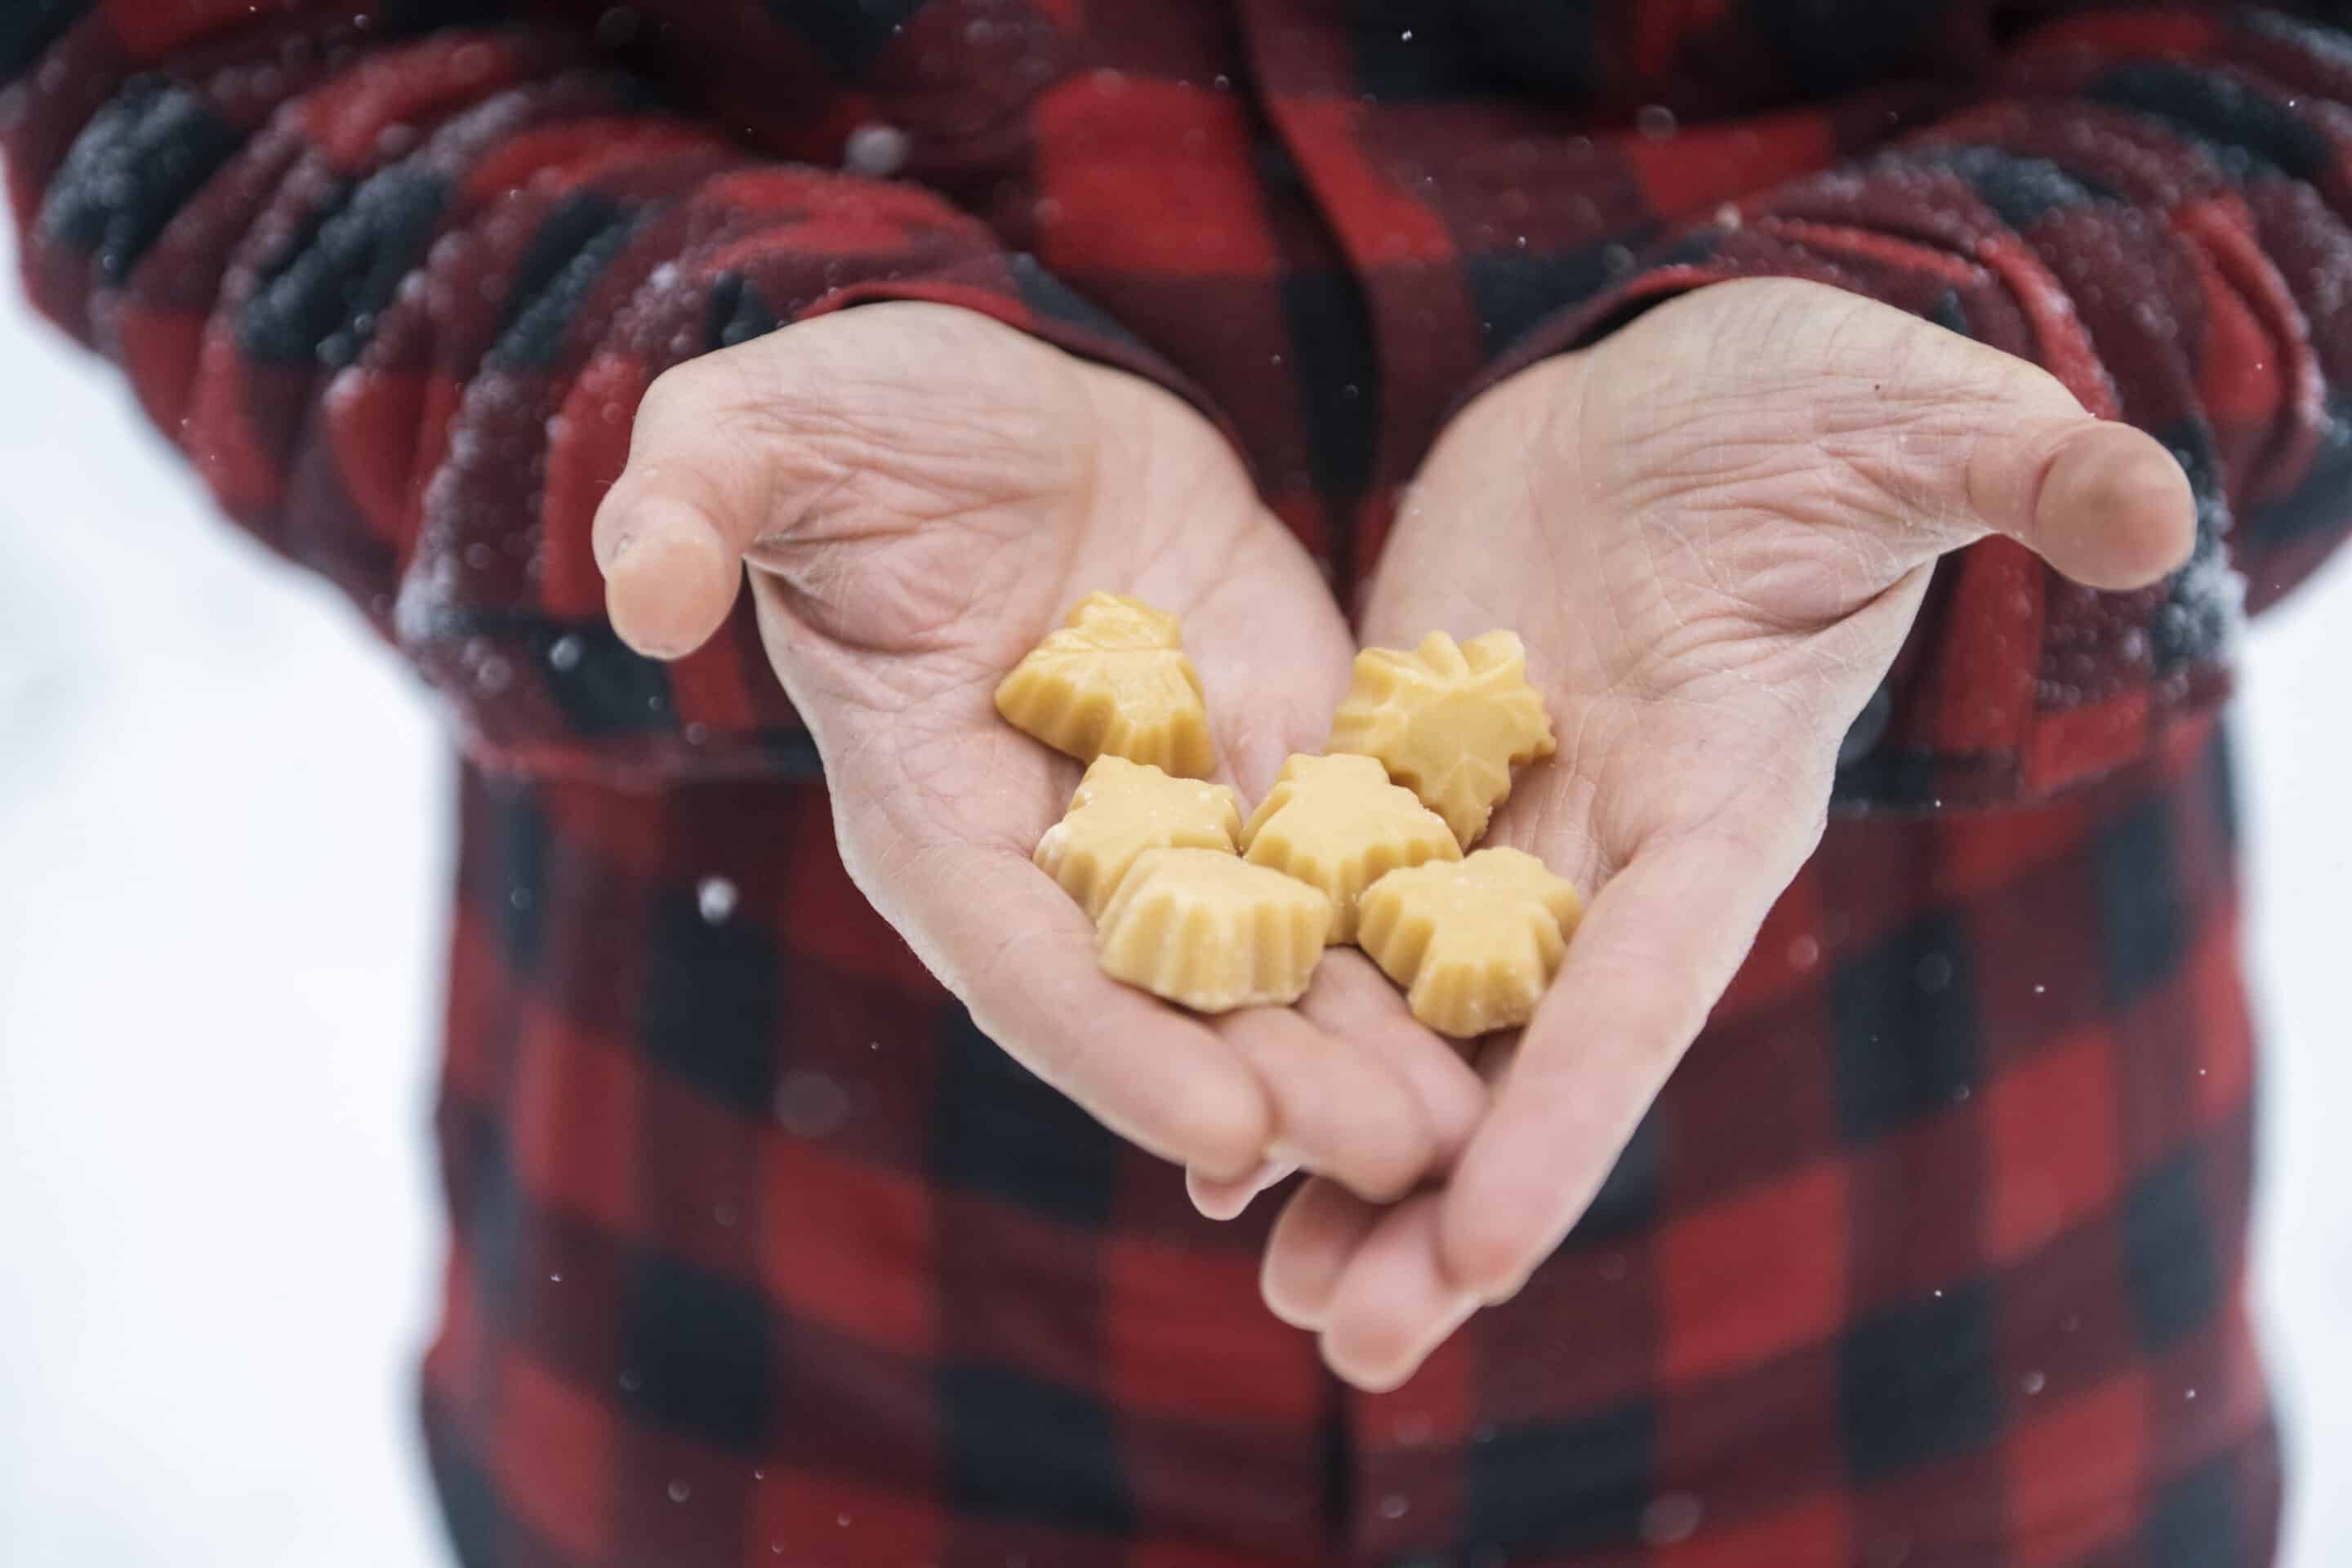 Maple Makes the Holiday Meal: Hands hold maple candy